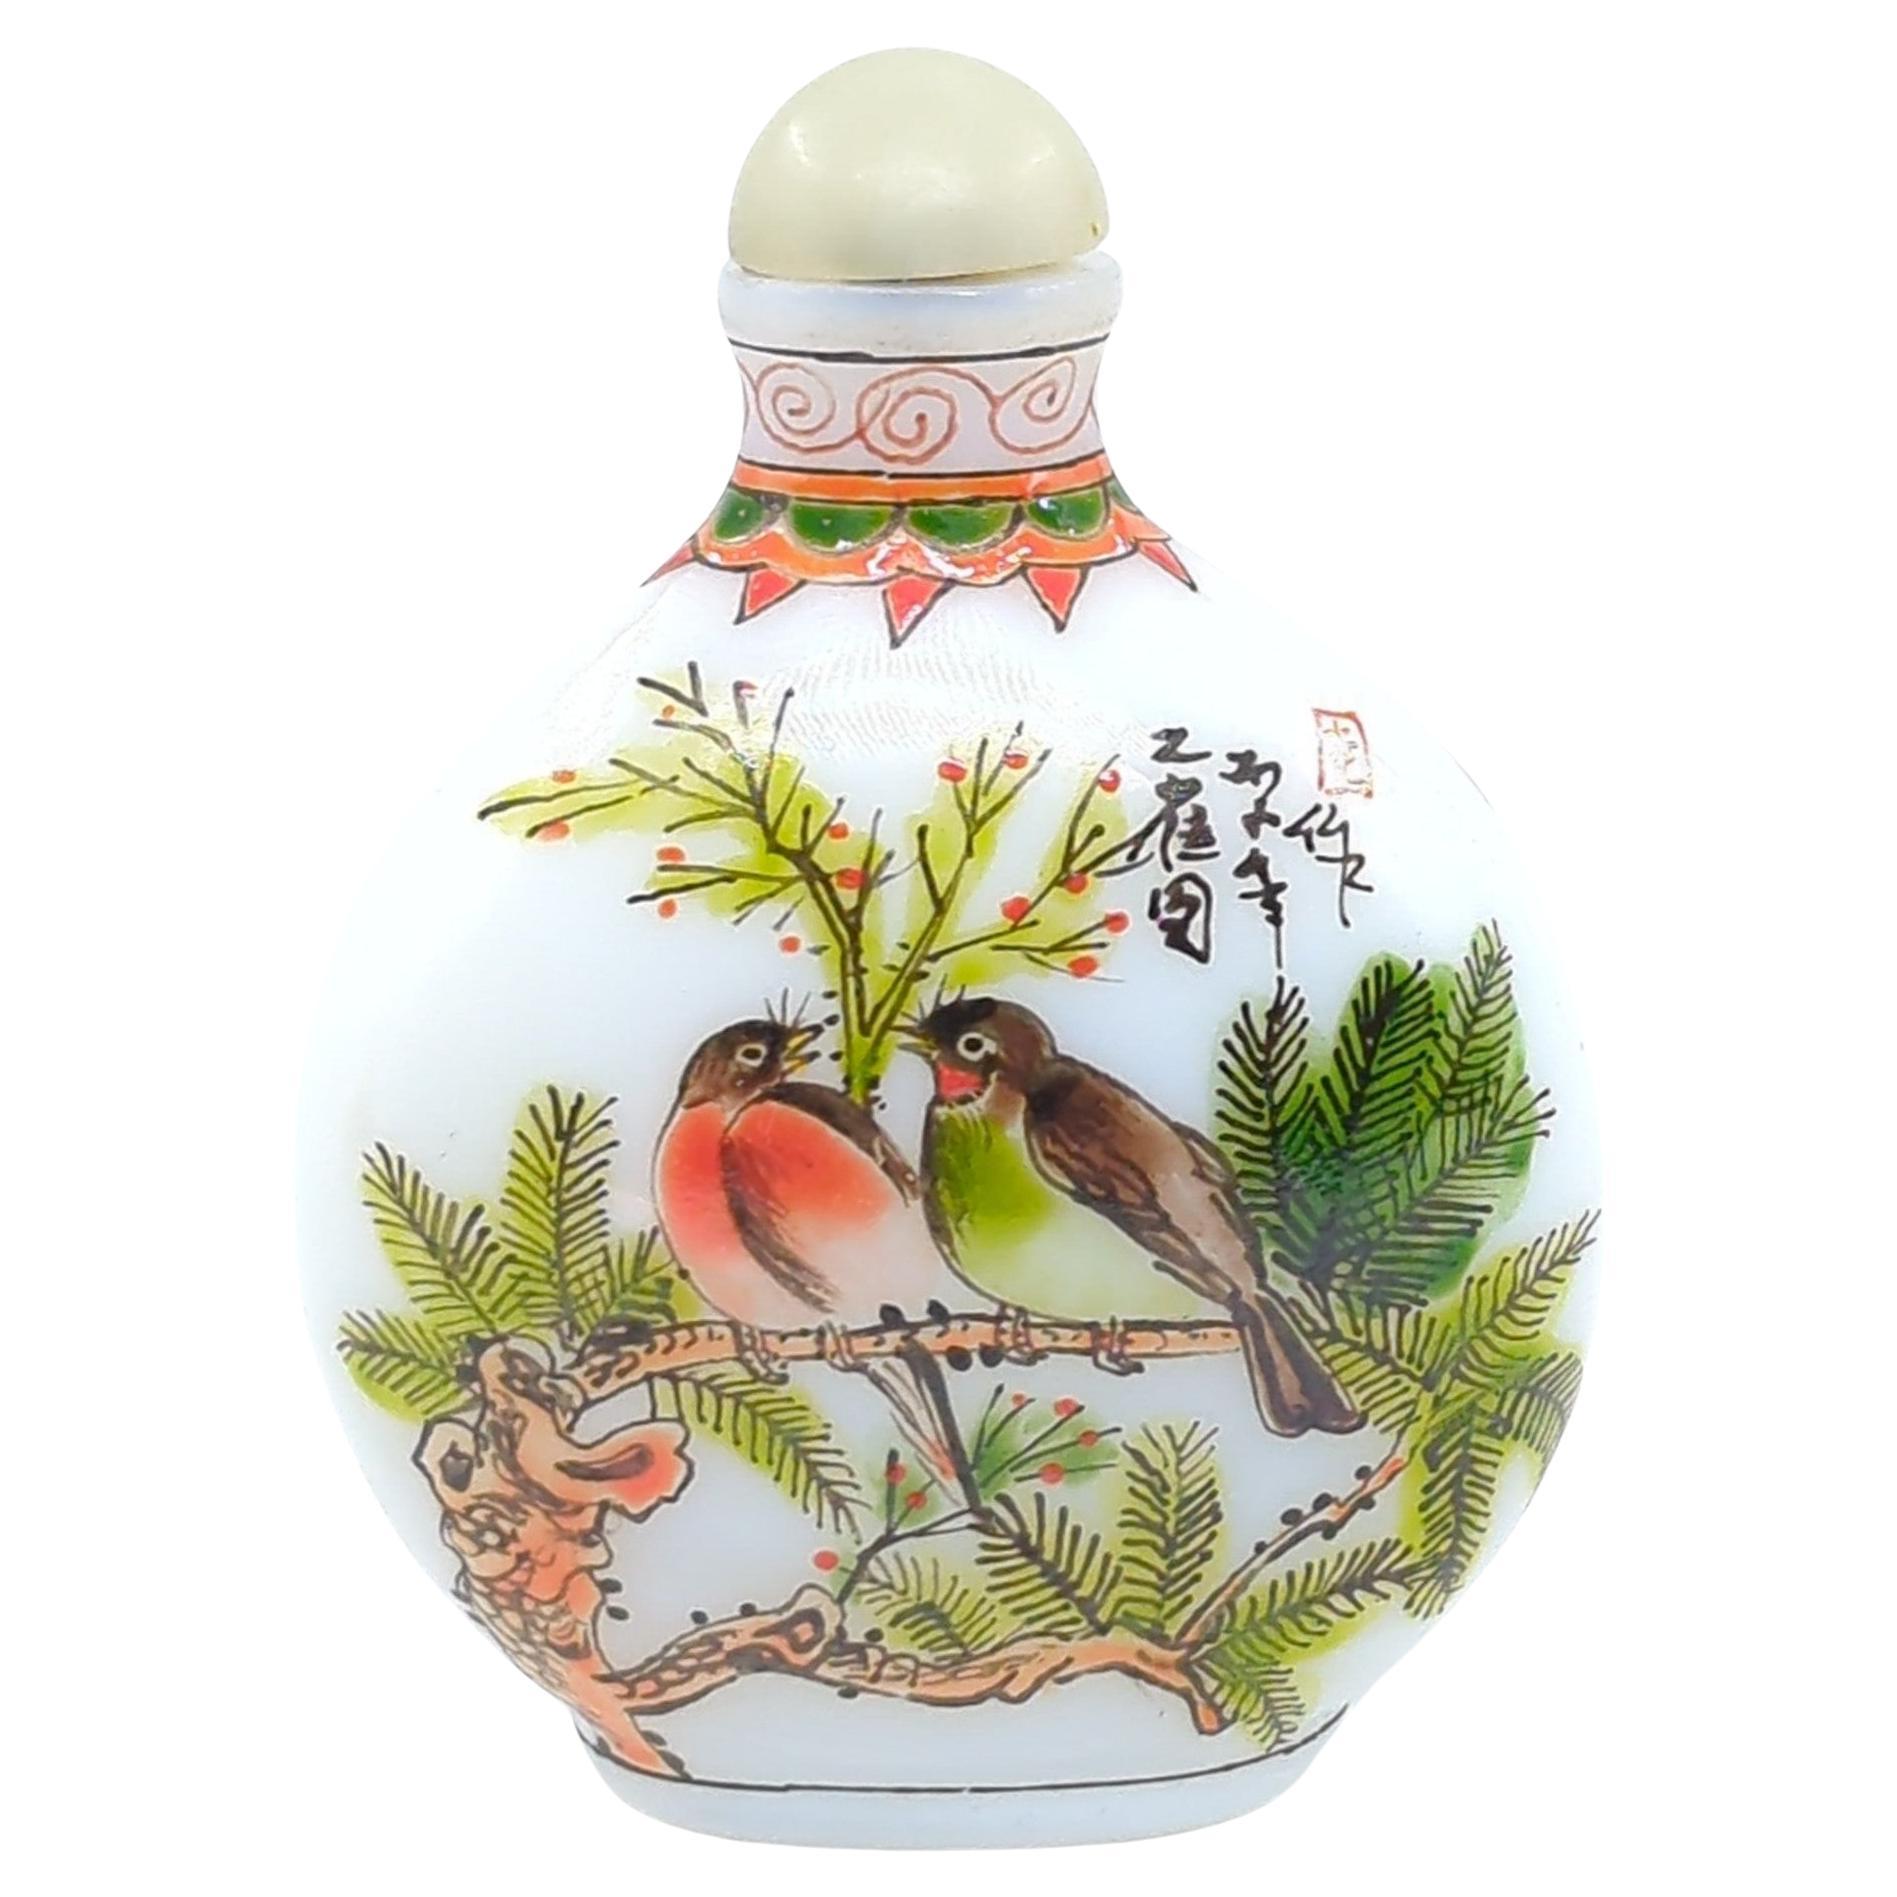 Chinese Enamel Milk Glass Snuff Bottle Guyuexuan Old Moon Pavillion Mark 20c In Good Condition For Sale In Richmond, CA